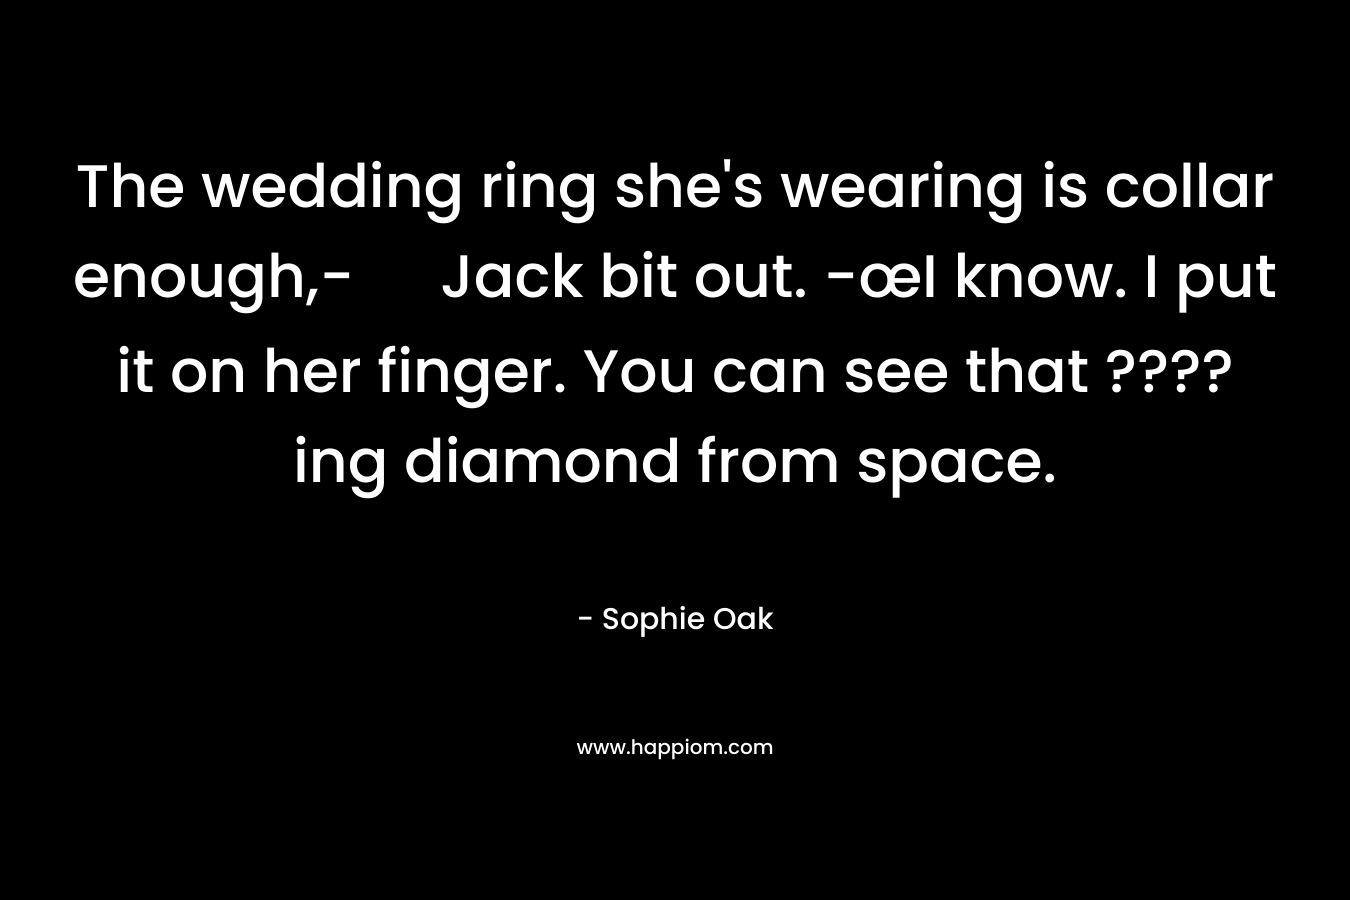 The wedding ring she’s wearing is collar enough,- Jack bit out. -œI know. I put it on her finger. You can see that ????ing diamond from space. – Sophie Oak